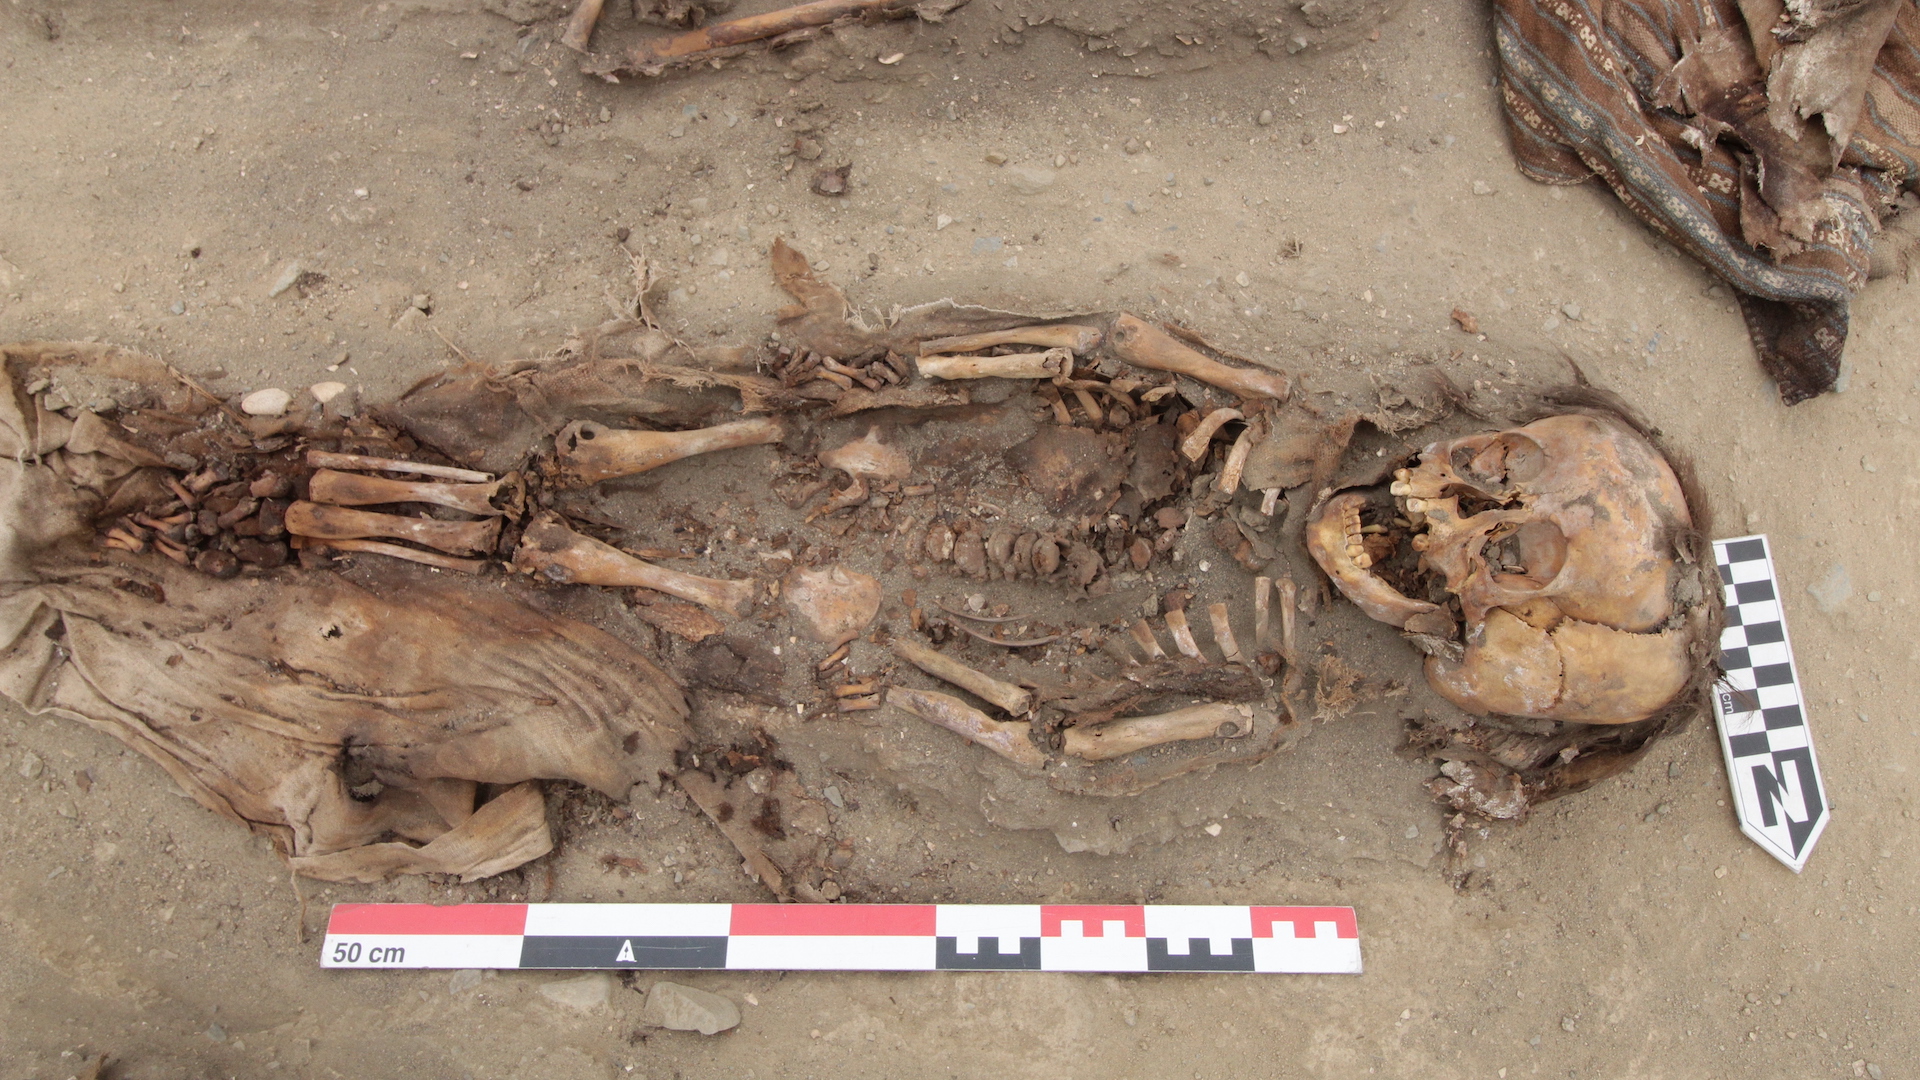 Skeletons of Incan kids buried 500 years ago found marred with smallpox